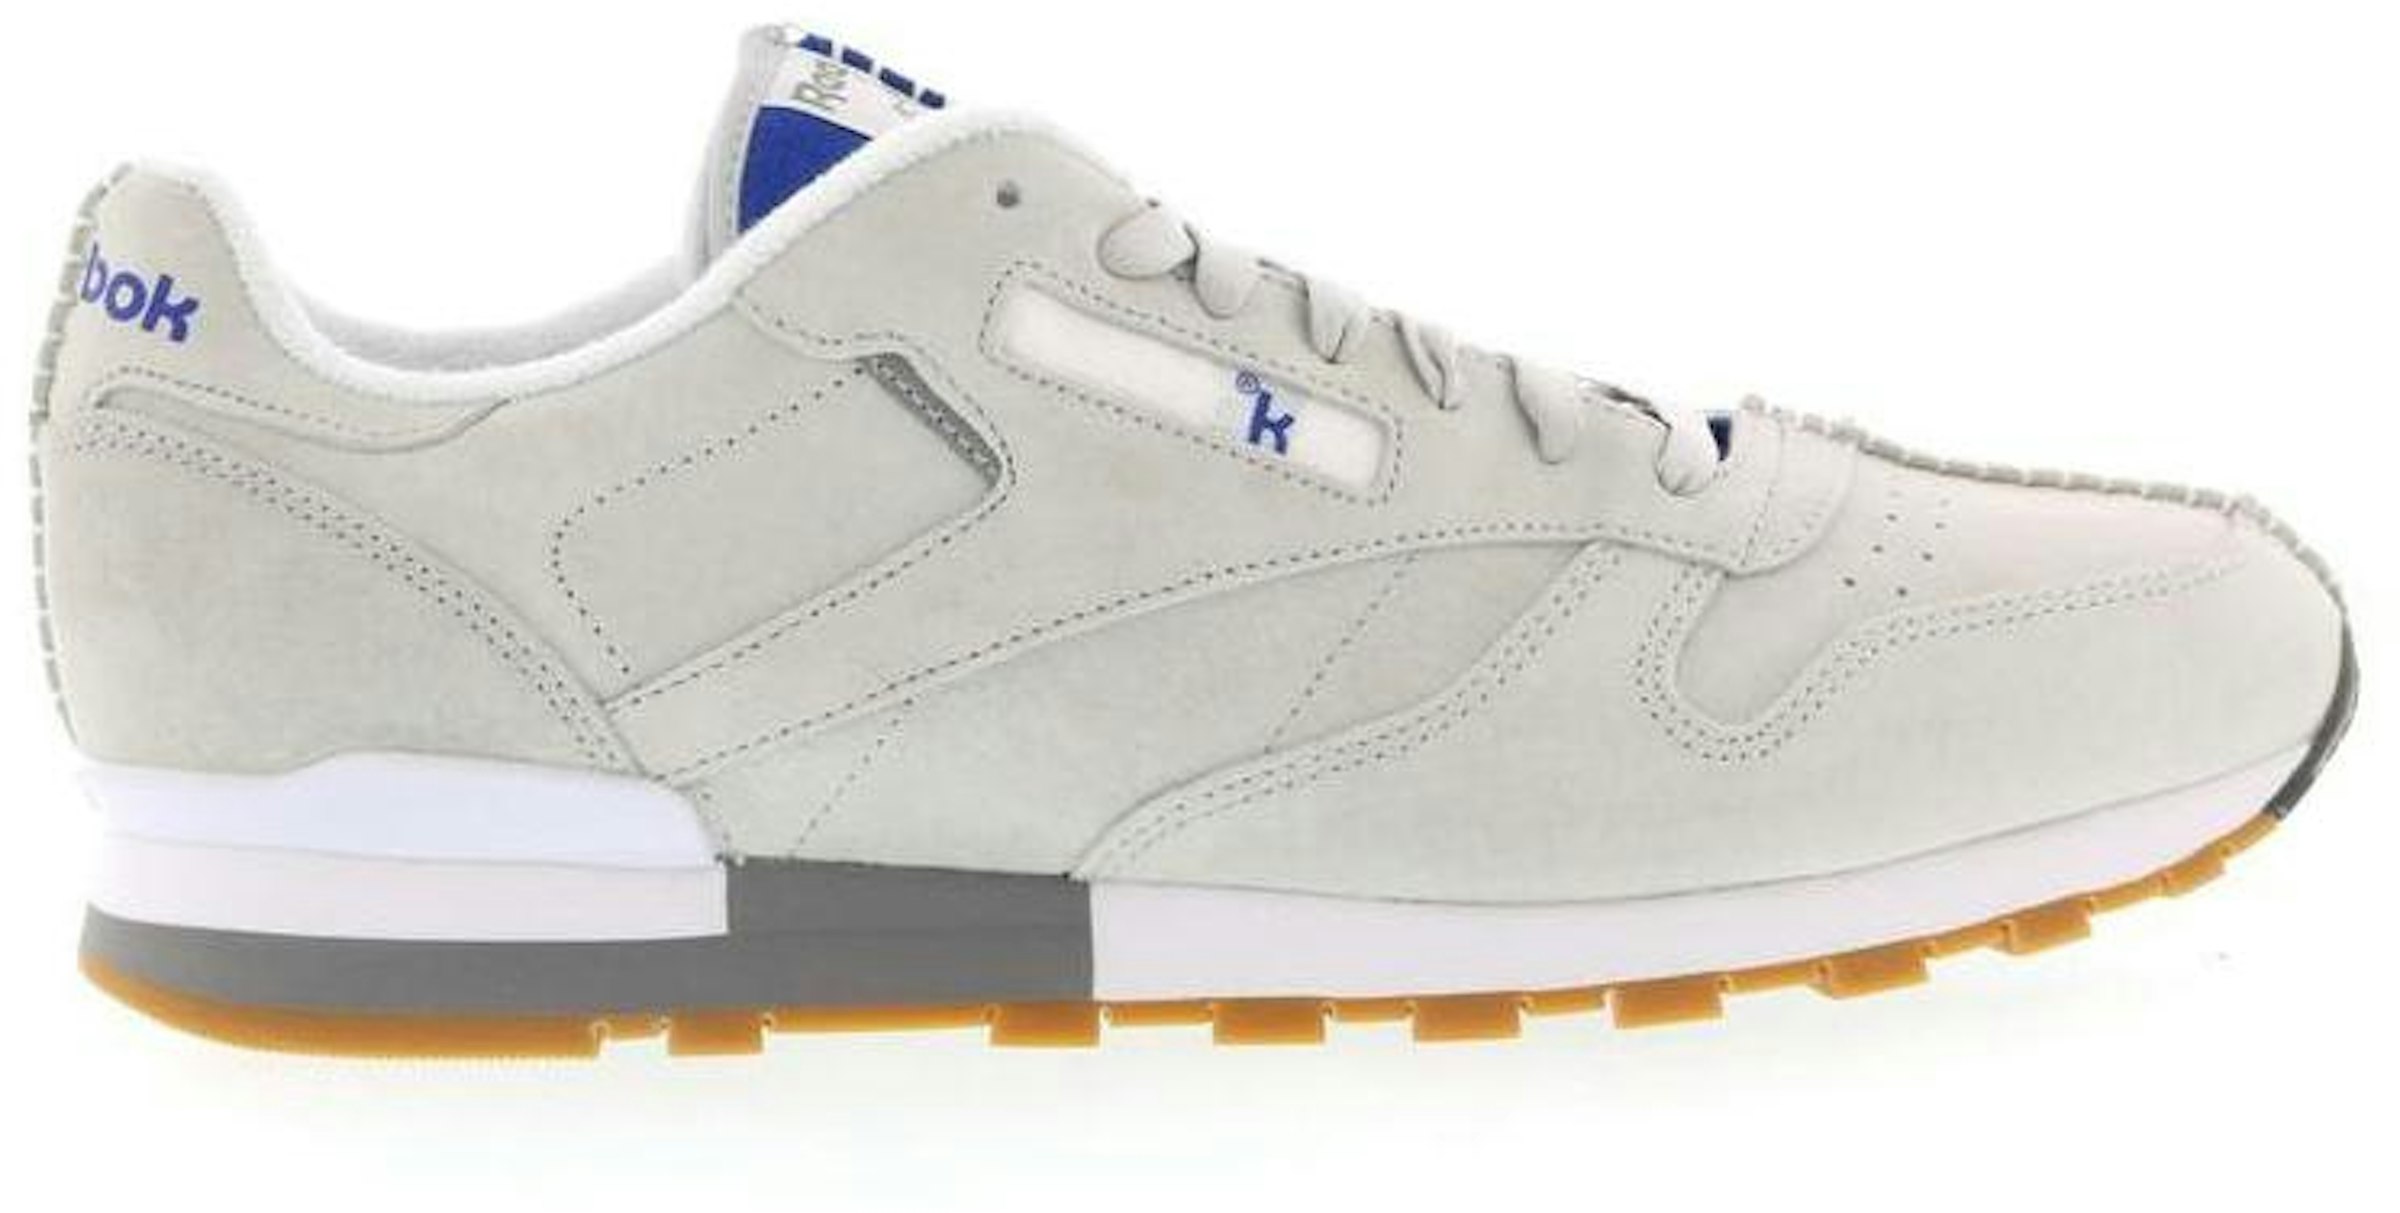 Reebok Classic Leather Kendrick Deconstructed - BD4185 -